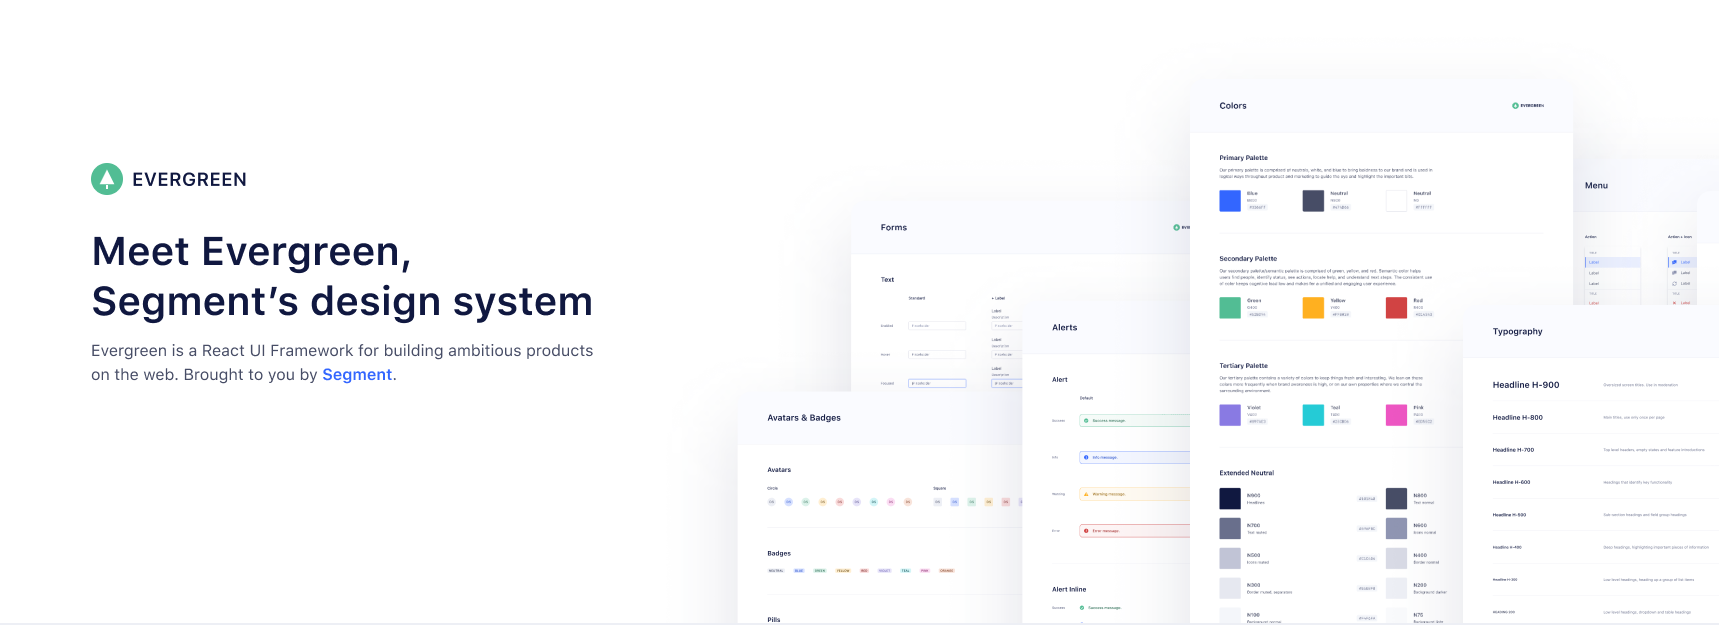 Evergreen, A Design System for the Web. Evergreen is a React UI Framework for building ambitious products on the web. Brought to you by Segment.